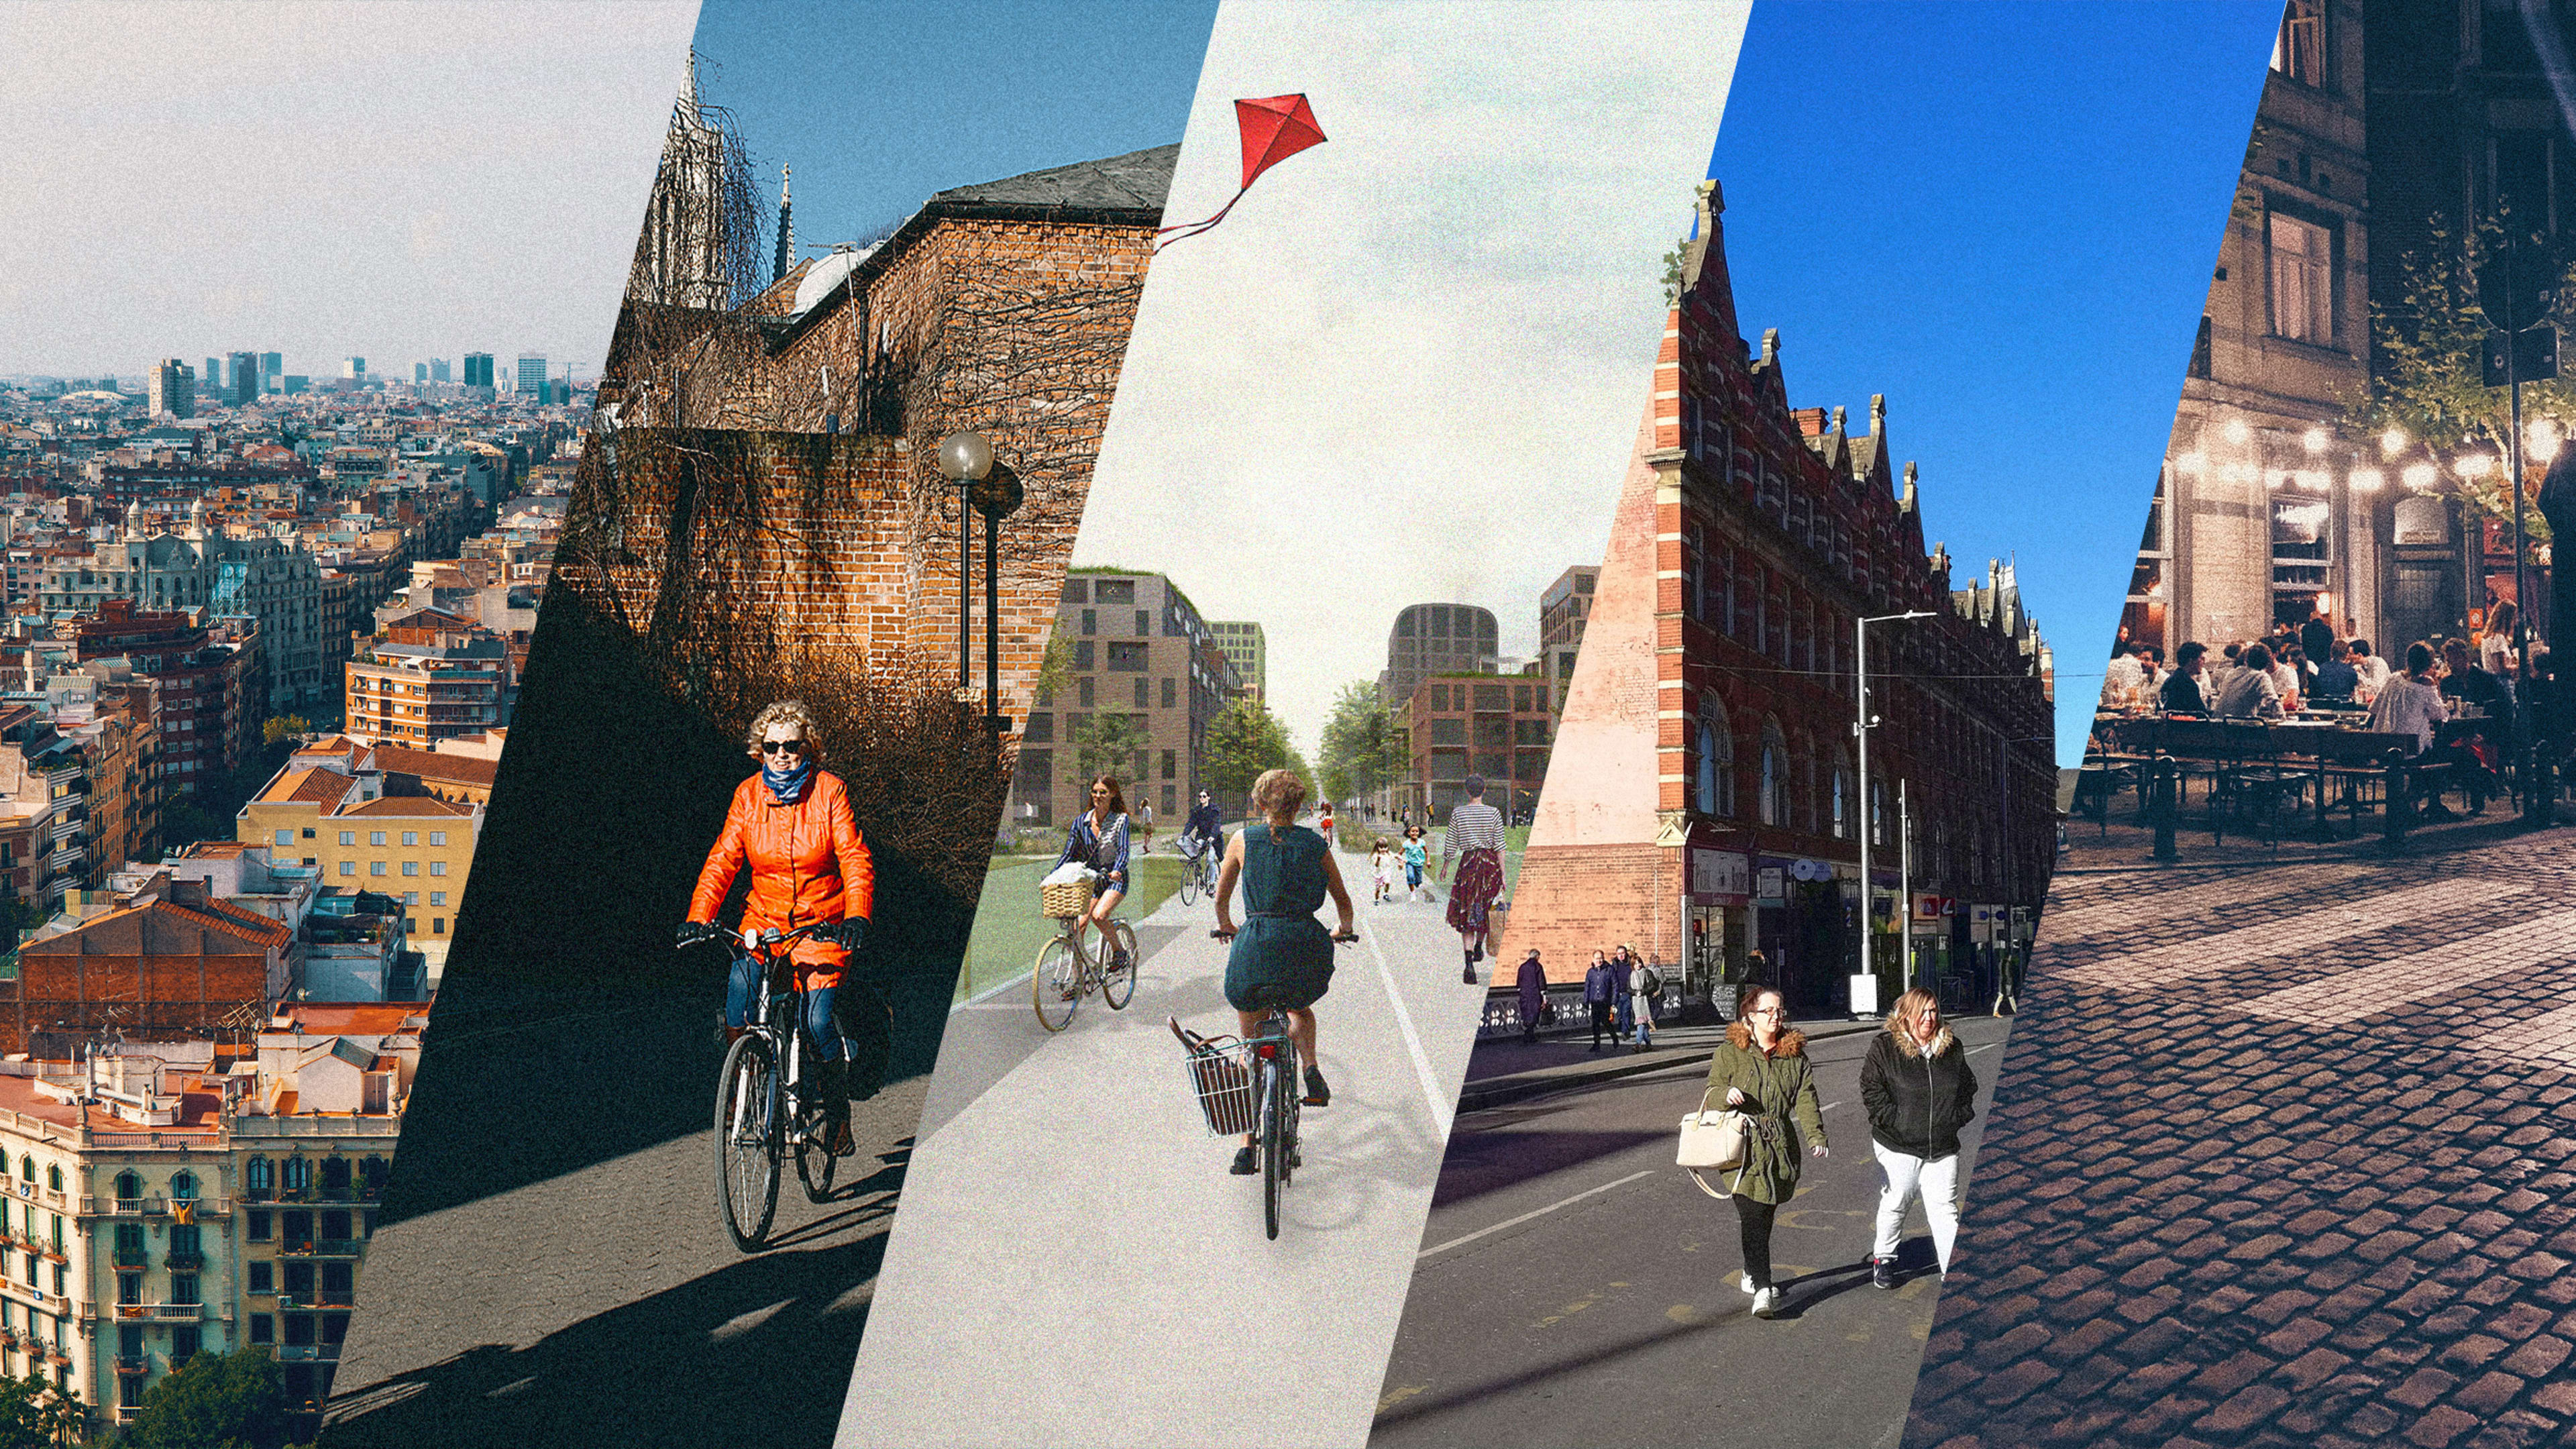 Here are 11 more cities that have joined the car-free revolution